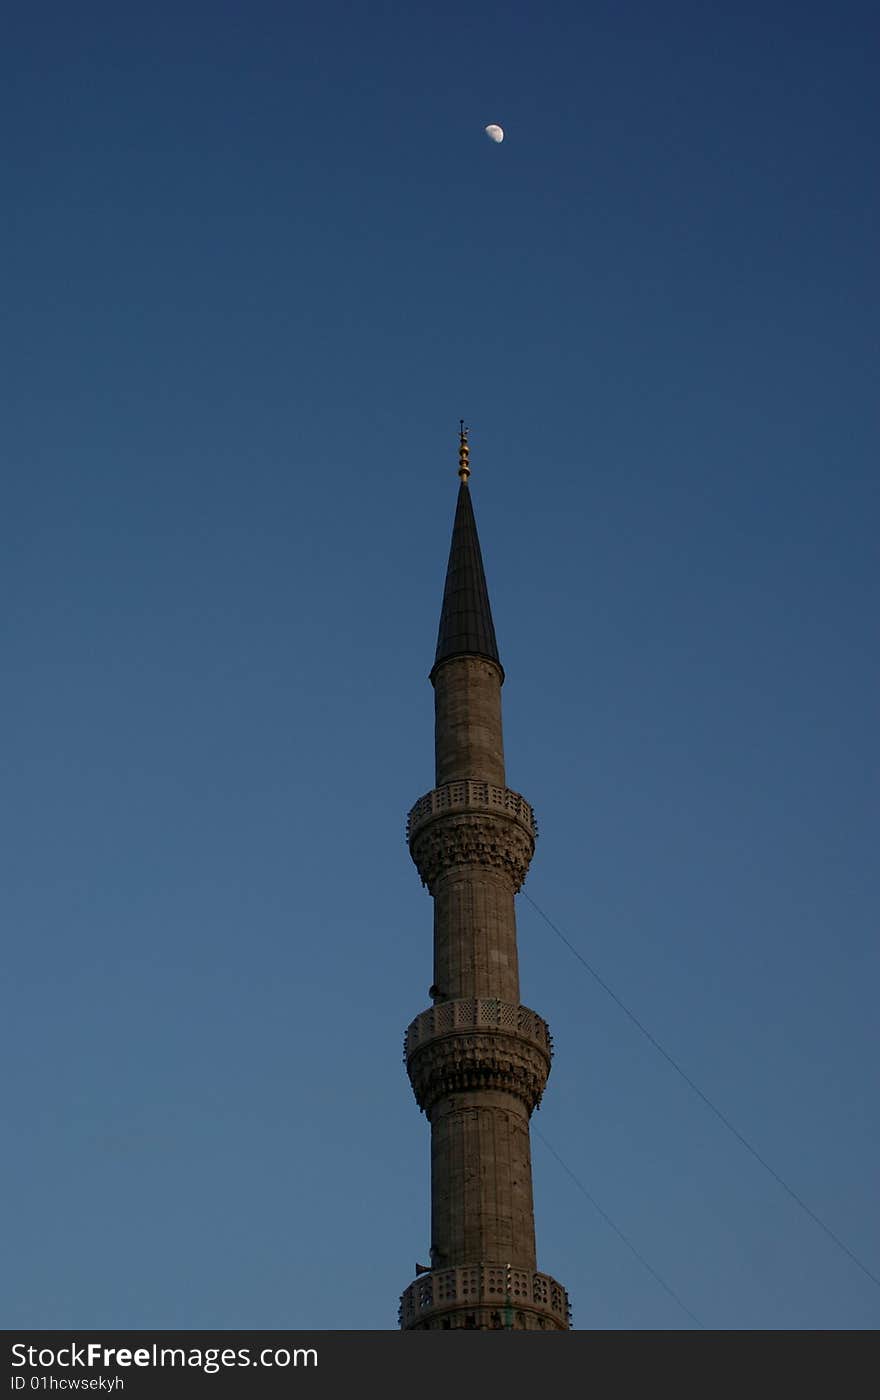 Muslim symbol of a minaret with moon on sky. Muslim symbol of a minaret with moon on sky